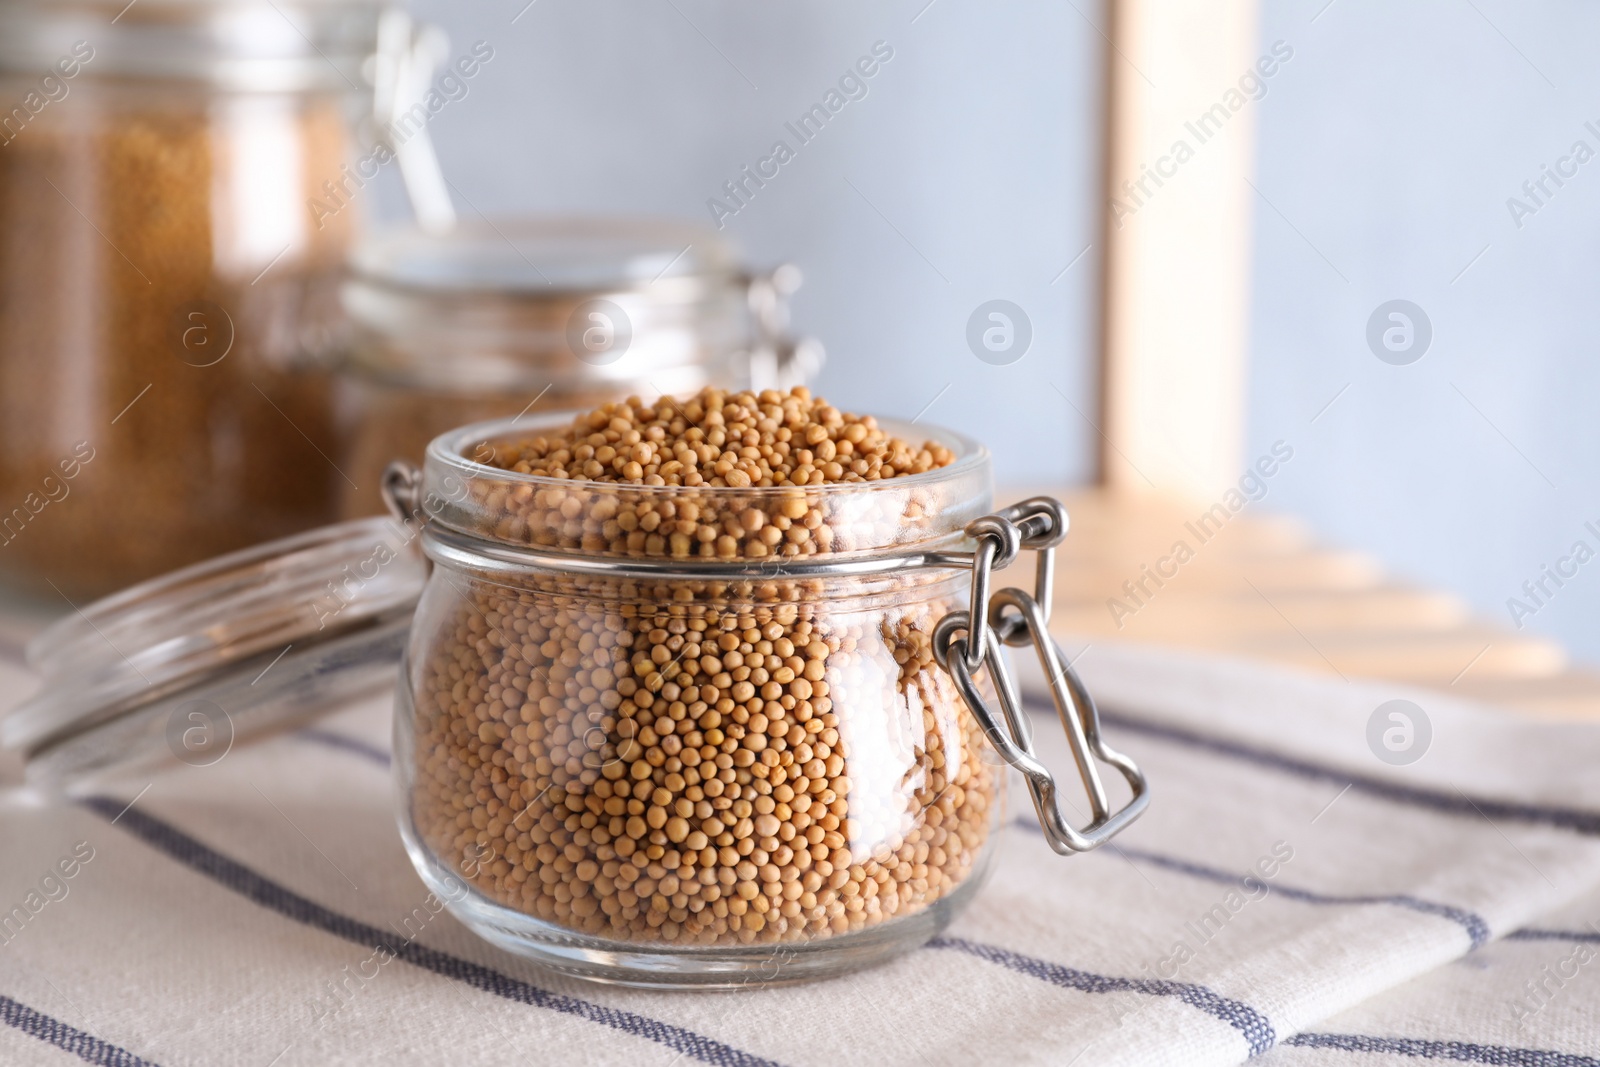 Photo of Mustard seeds in glass jar on table